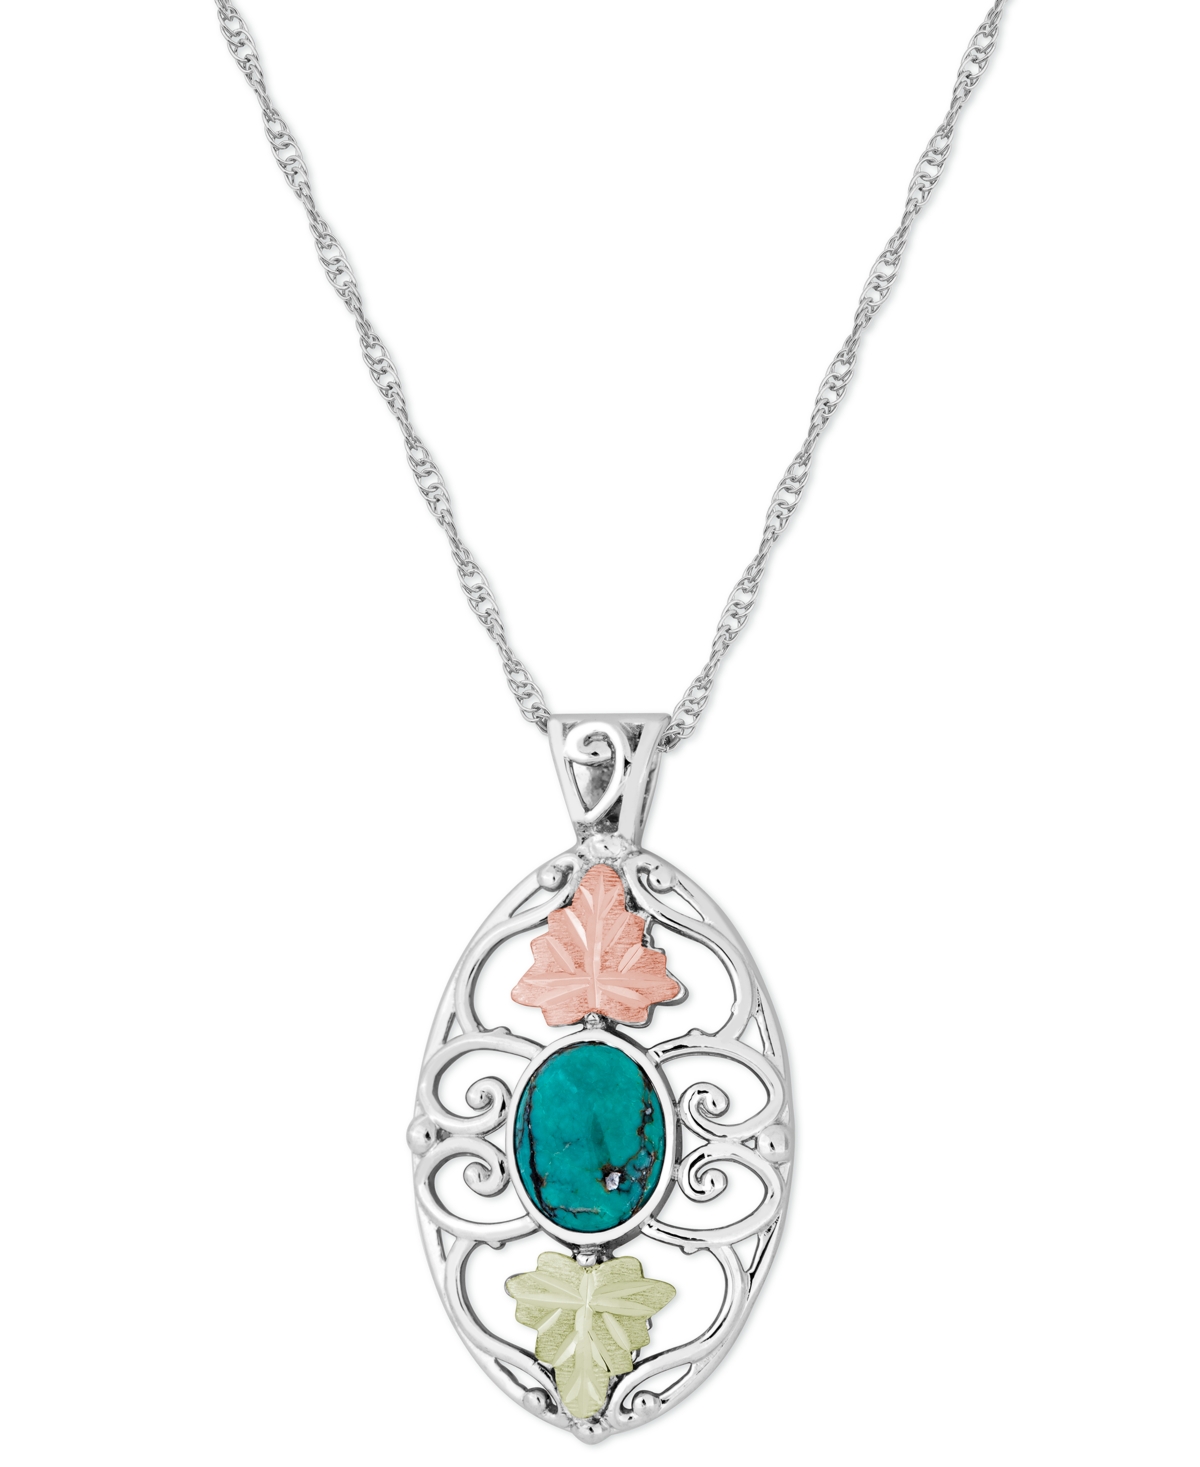 Turquoise Pendant 18" Necklace in Sterling Silver with 12K Rose and Green Gold - Silver